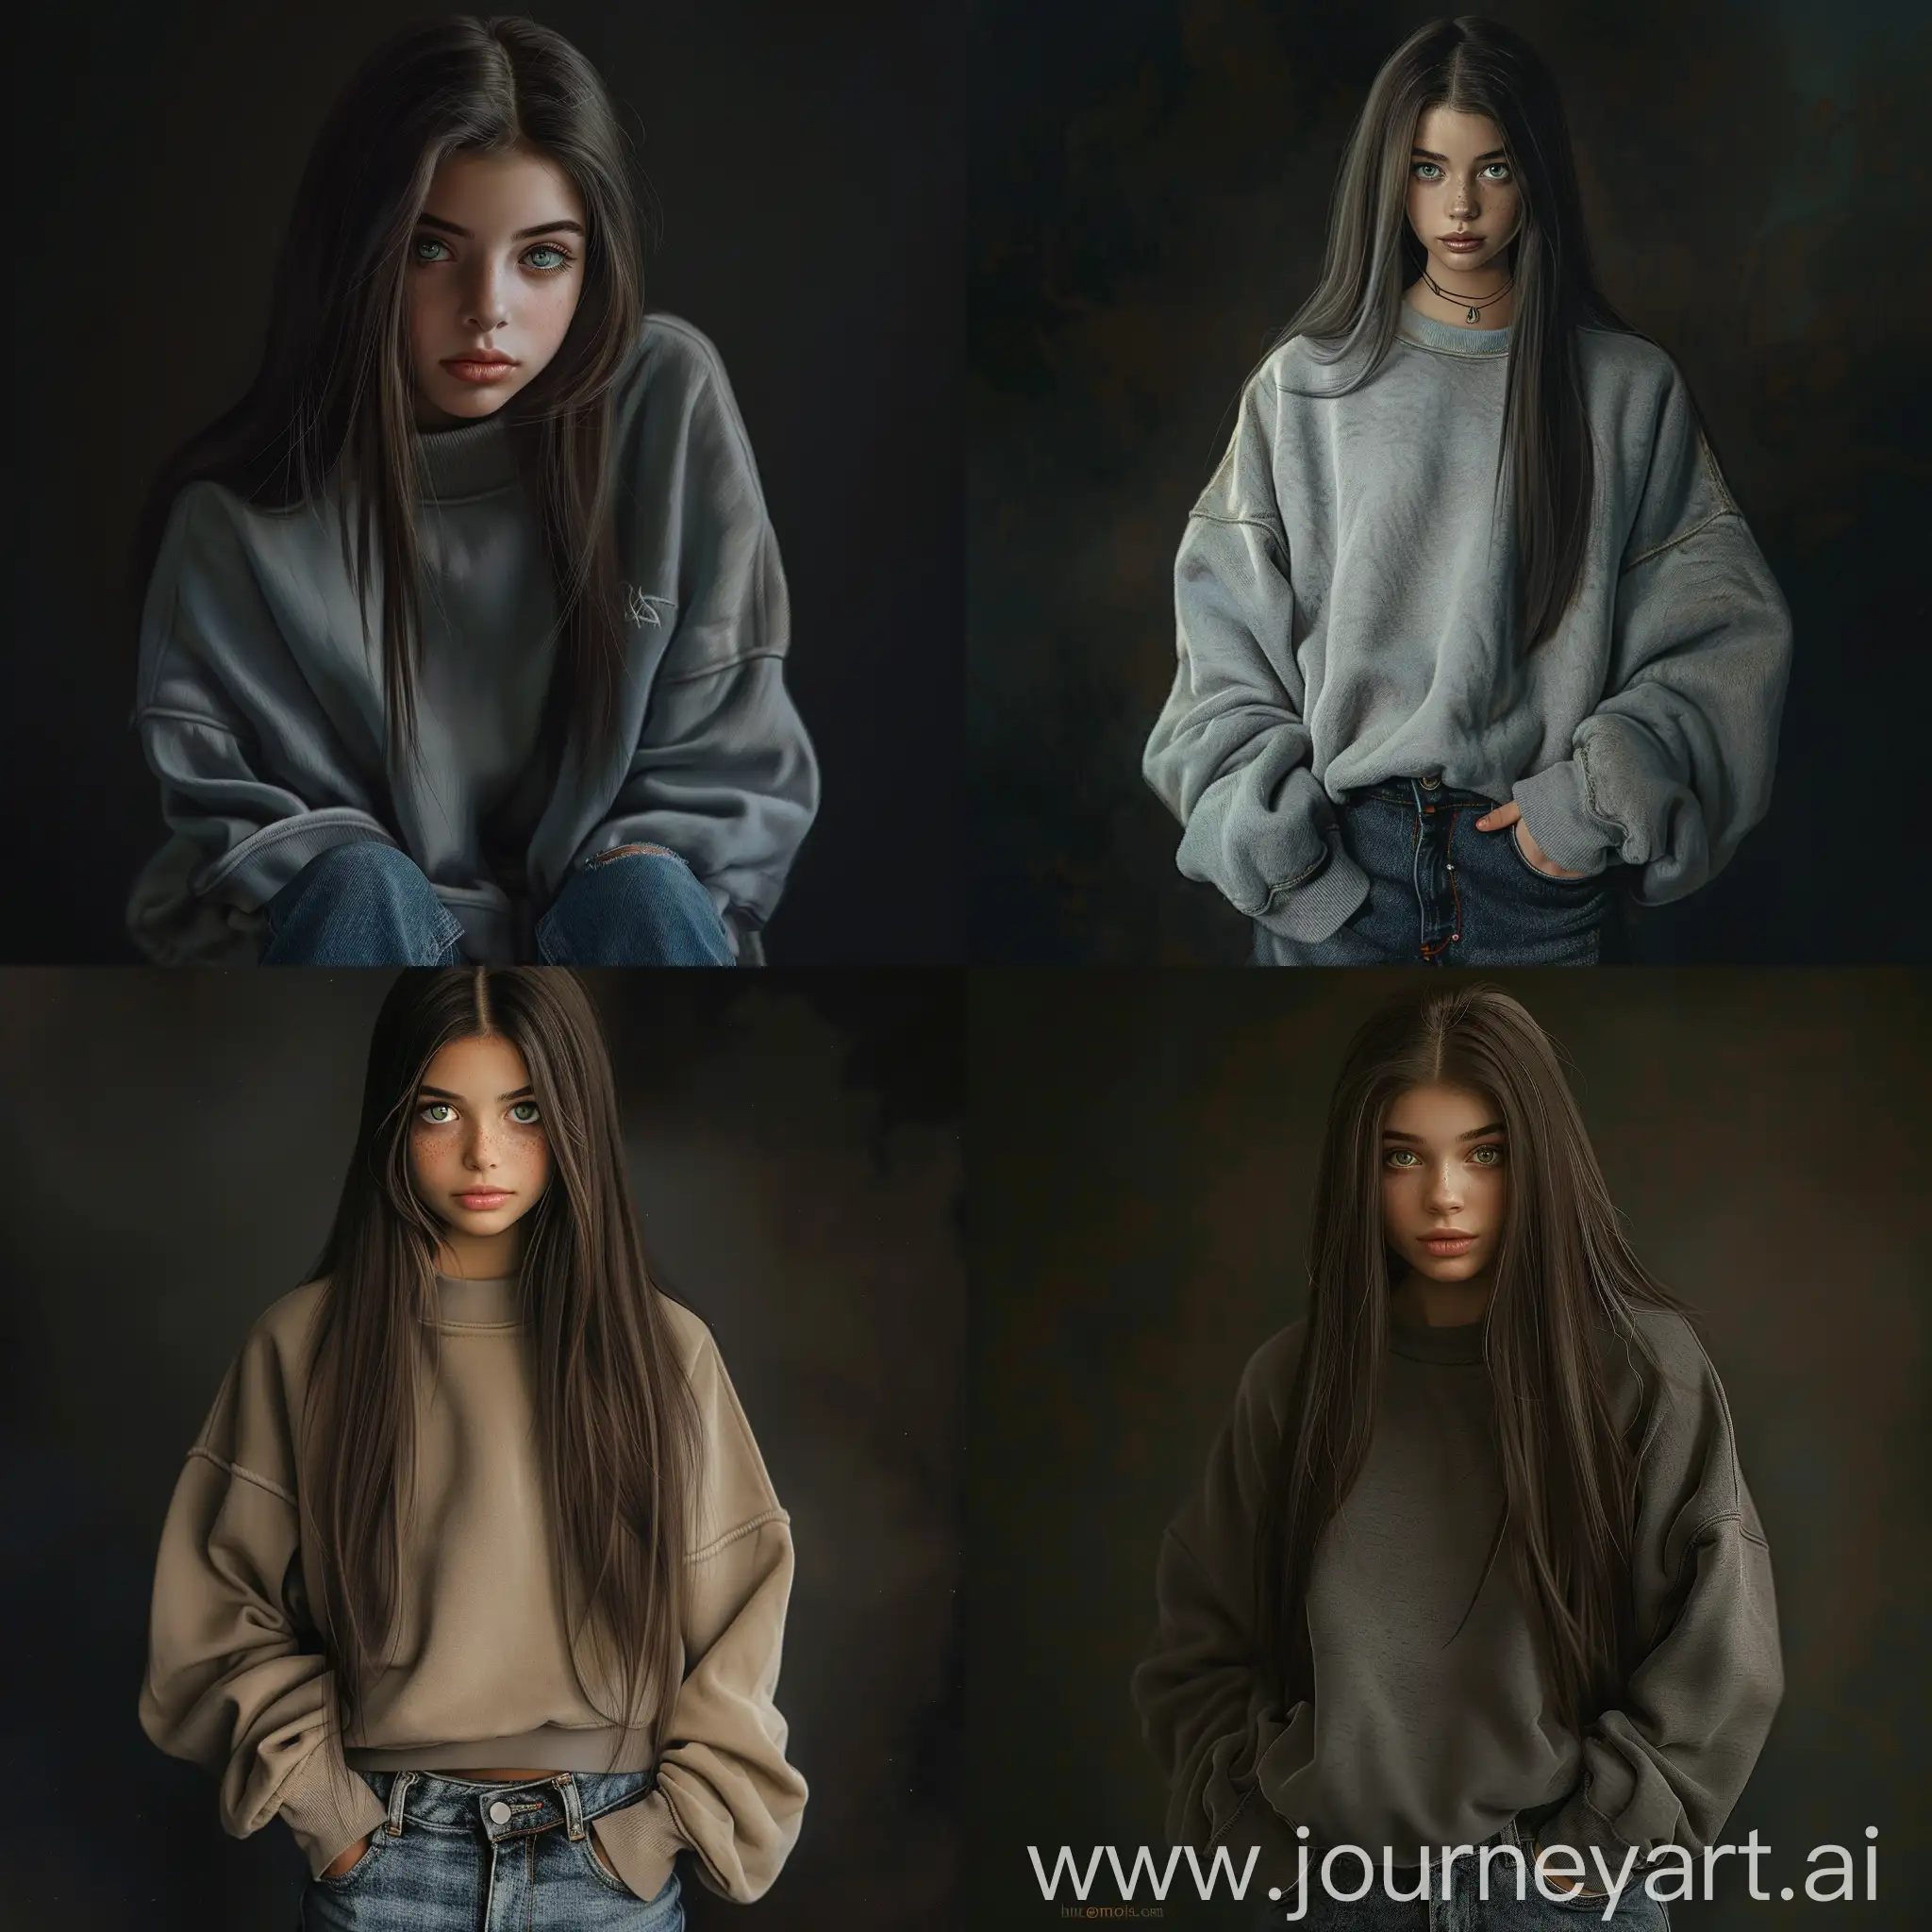 Chic-Teenager-in-Cozy-Attire-on-Dark-Background-HighQuality-Realistic-Art